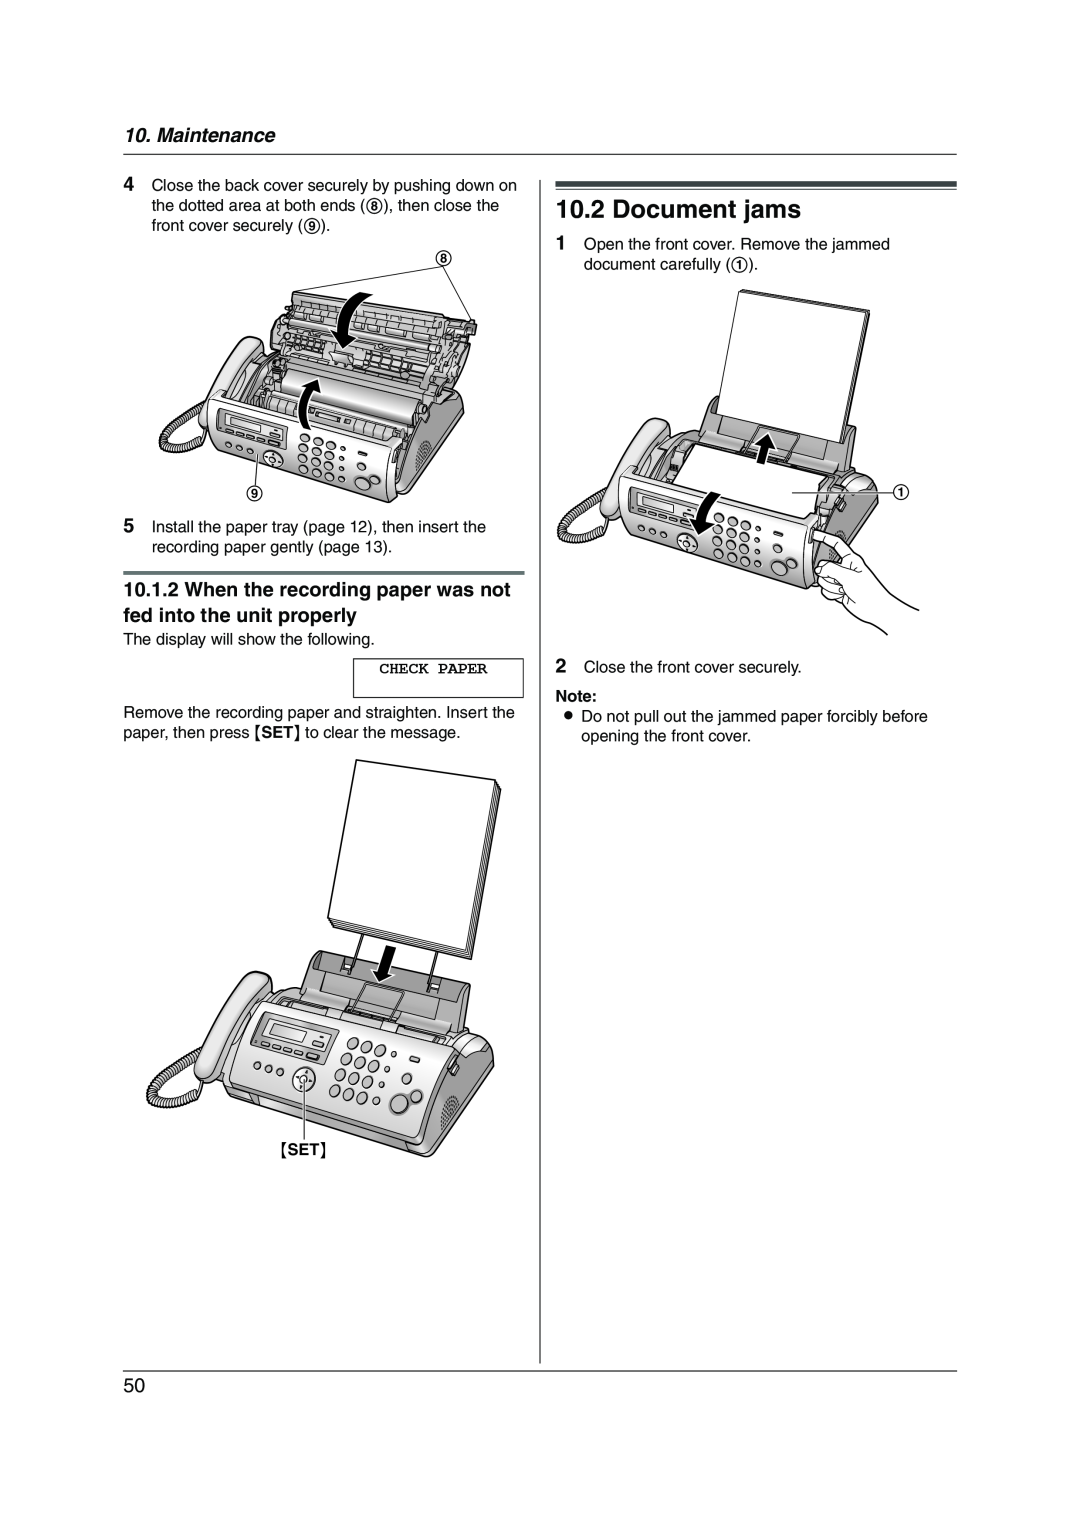 Panasonic KX-FP215 Document jams, Maintenance, When the recording paper was not fed into the unit properly 